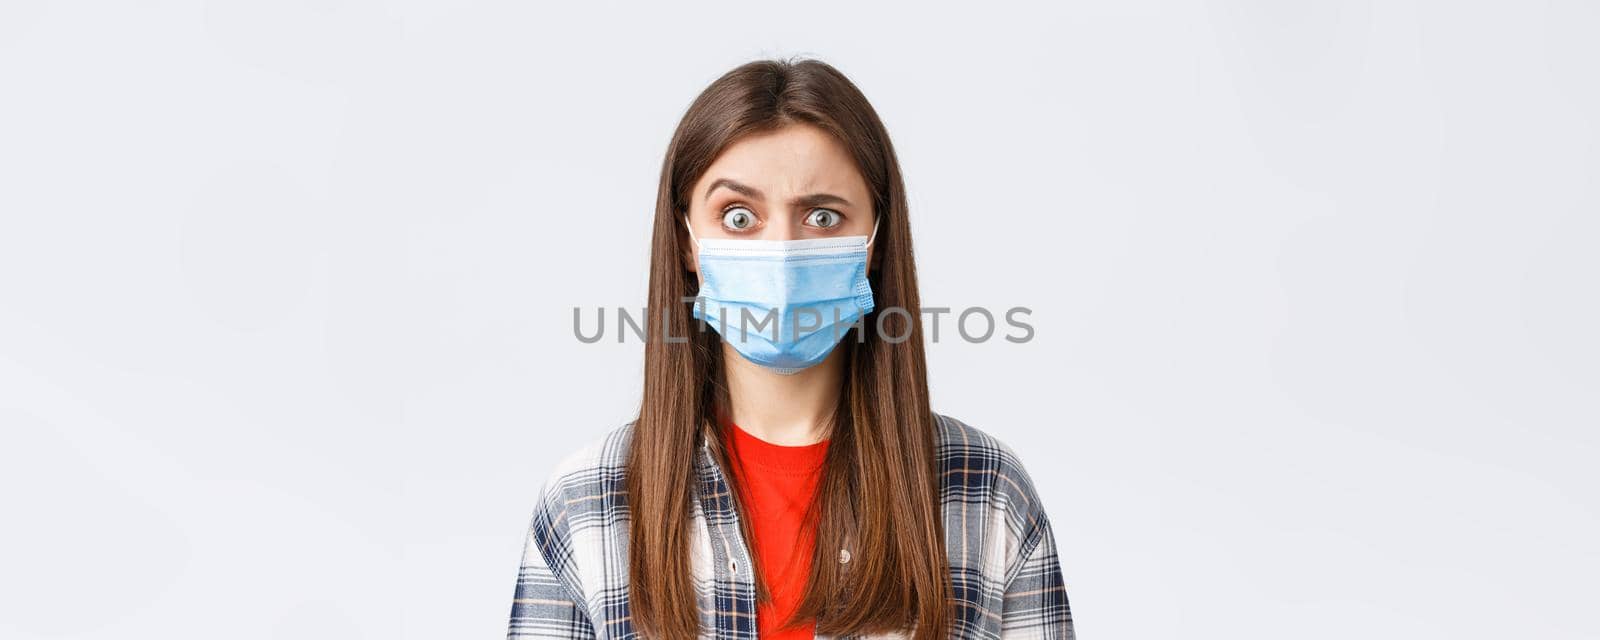 Coronavirus outbreak, leisure on quarantine, social distancing and emotions concept. Confused and startled girl in medical mask seeing something strange, raise eyebrow skeptical.